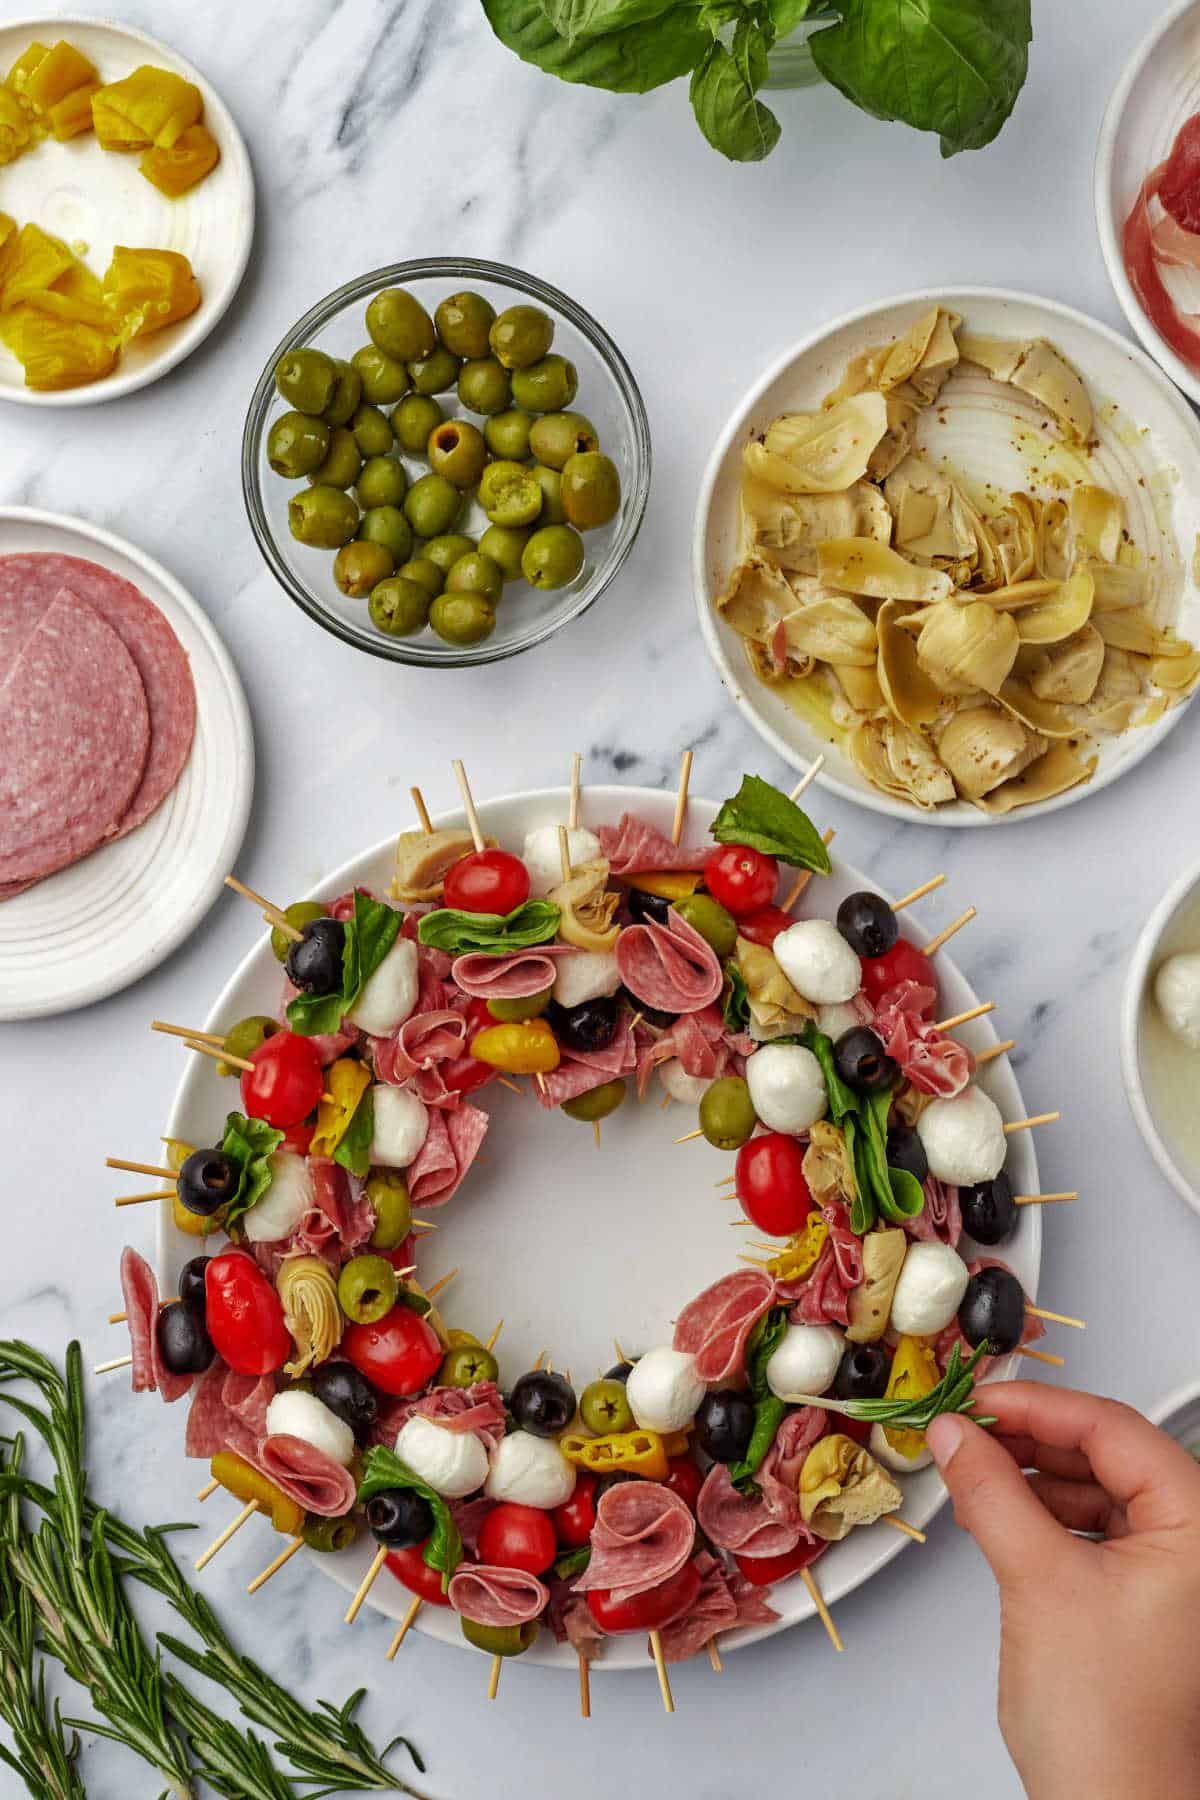 A hand placing rosemary sprigs on a charcuterie wreath.